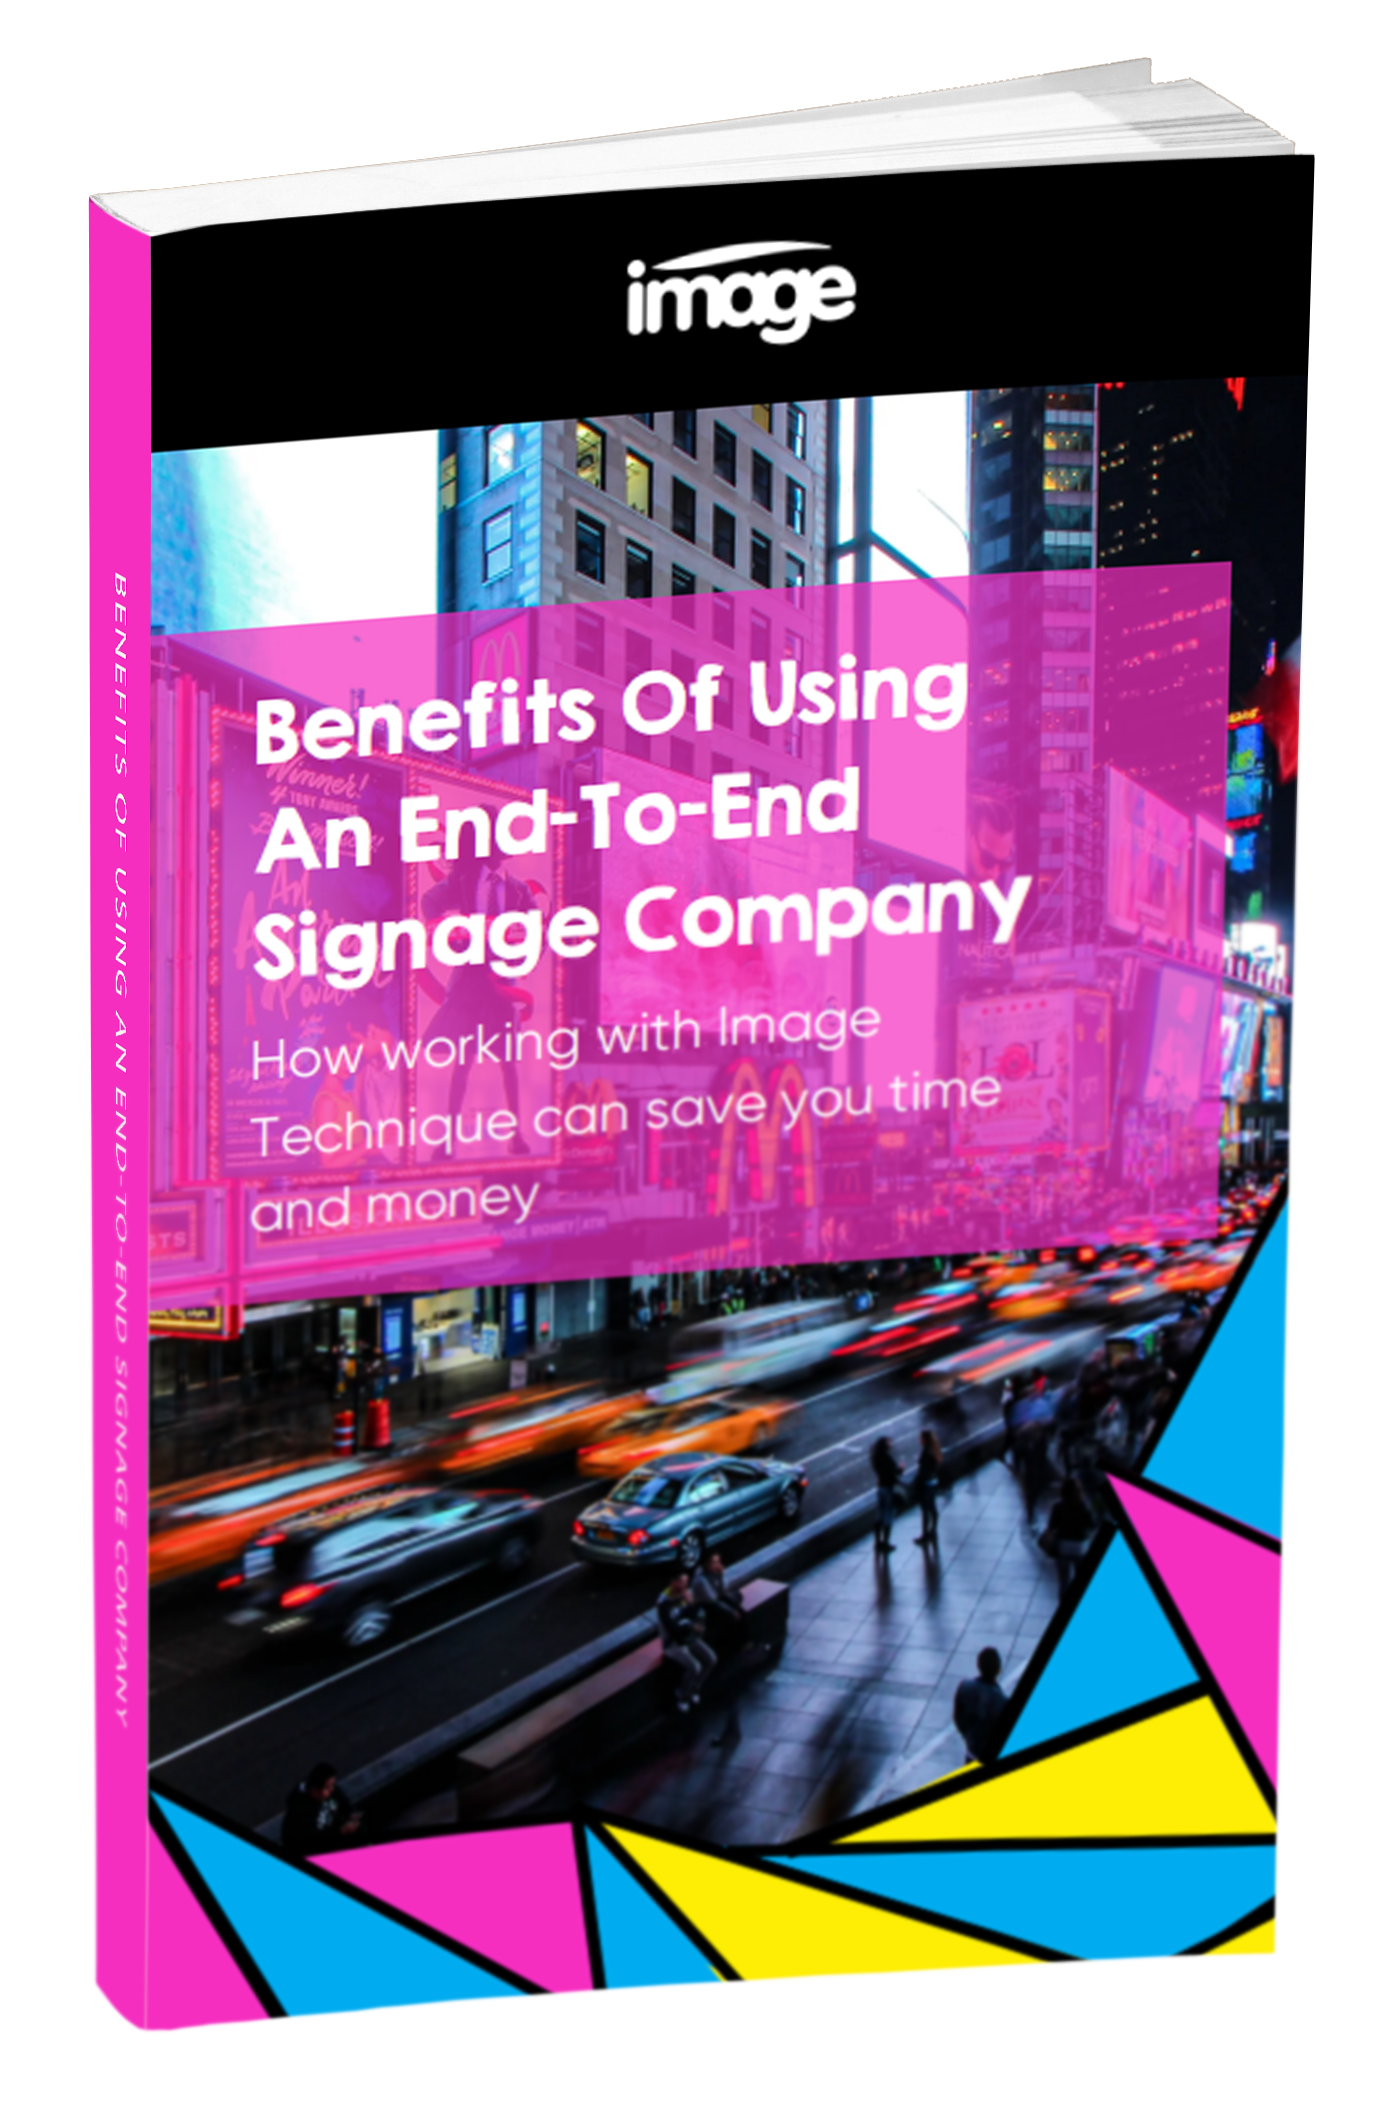 image-technique-benefits-of-using-an-end-to-end-signage-company-_1_